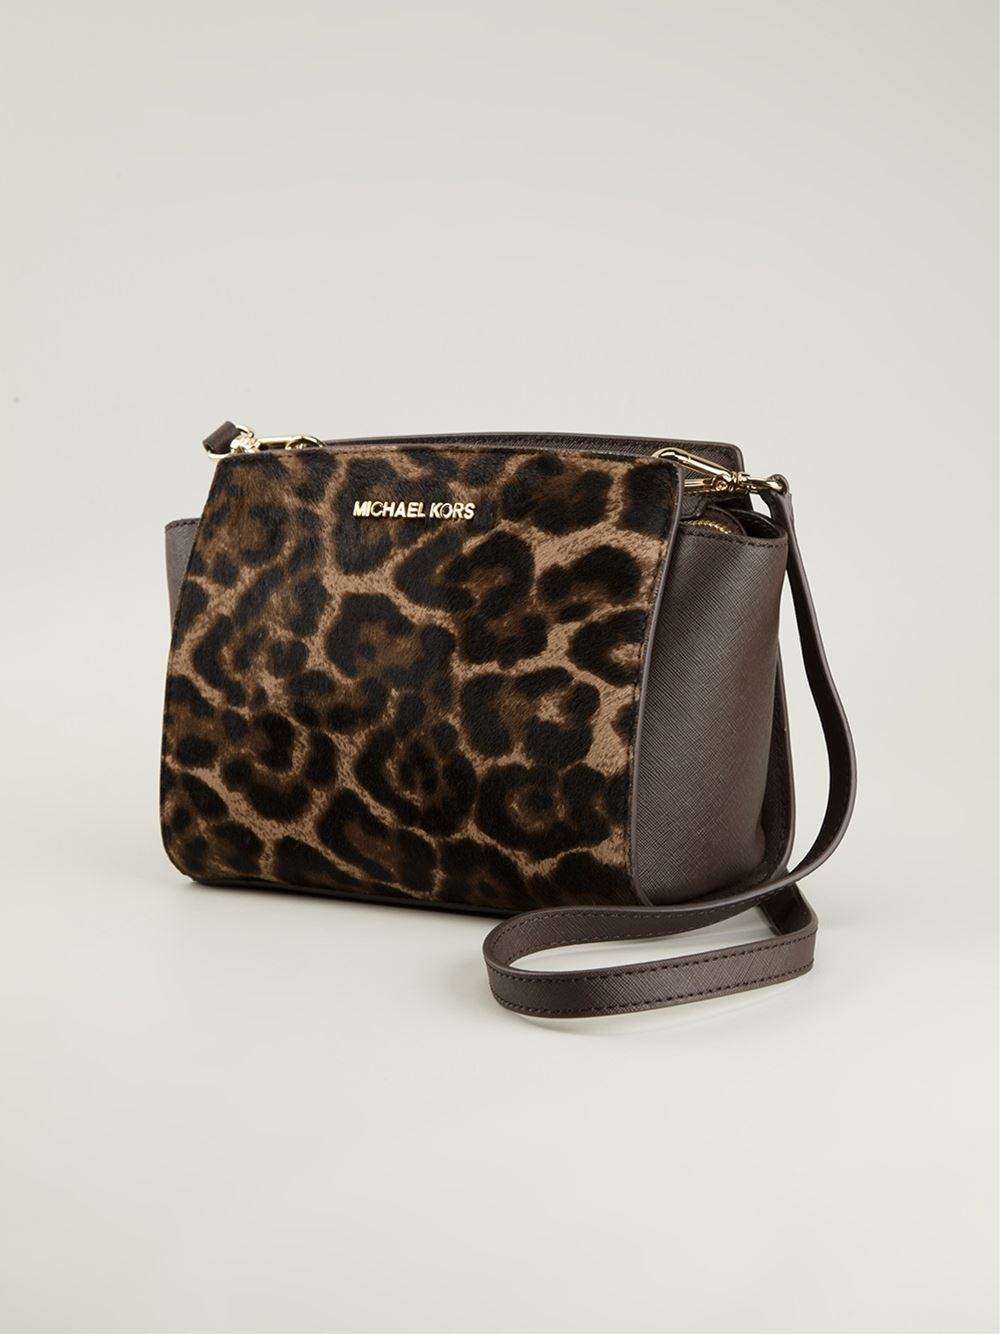 New Directions purse | Leopard purse, Purses, New directions